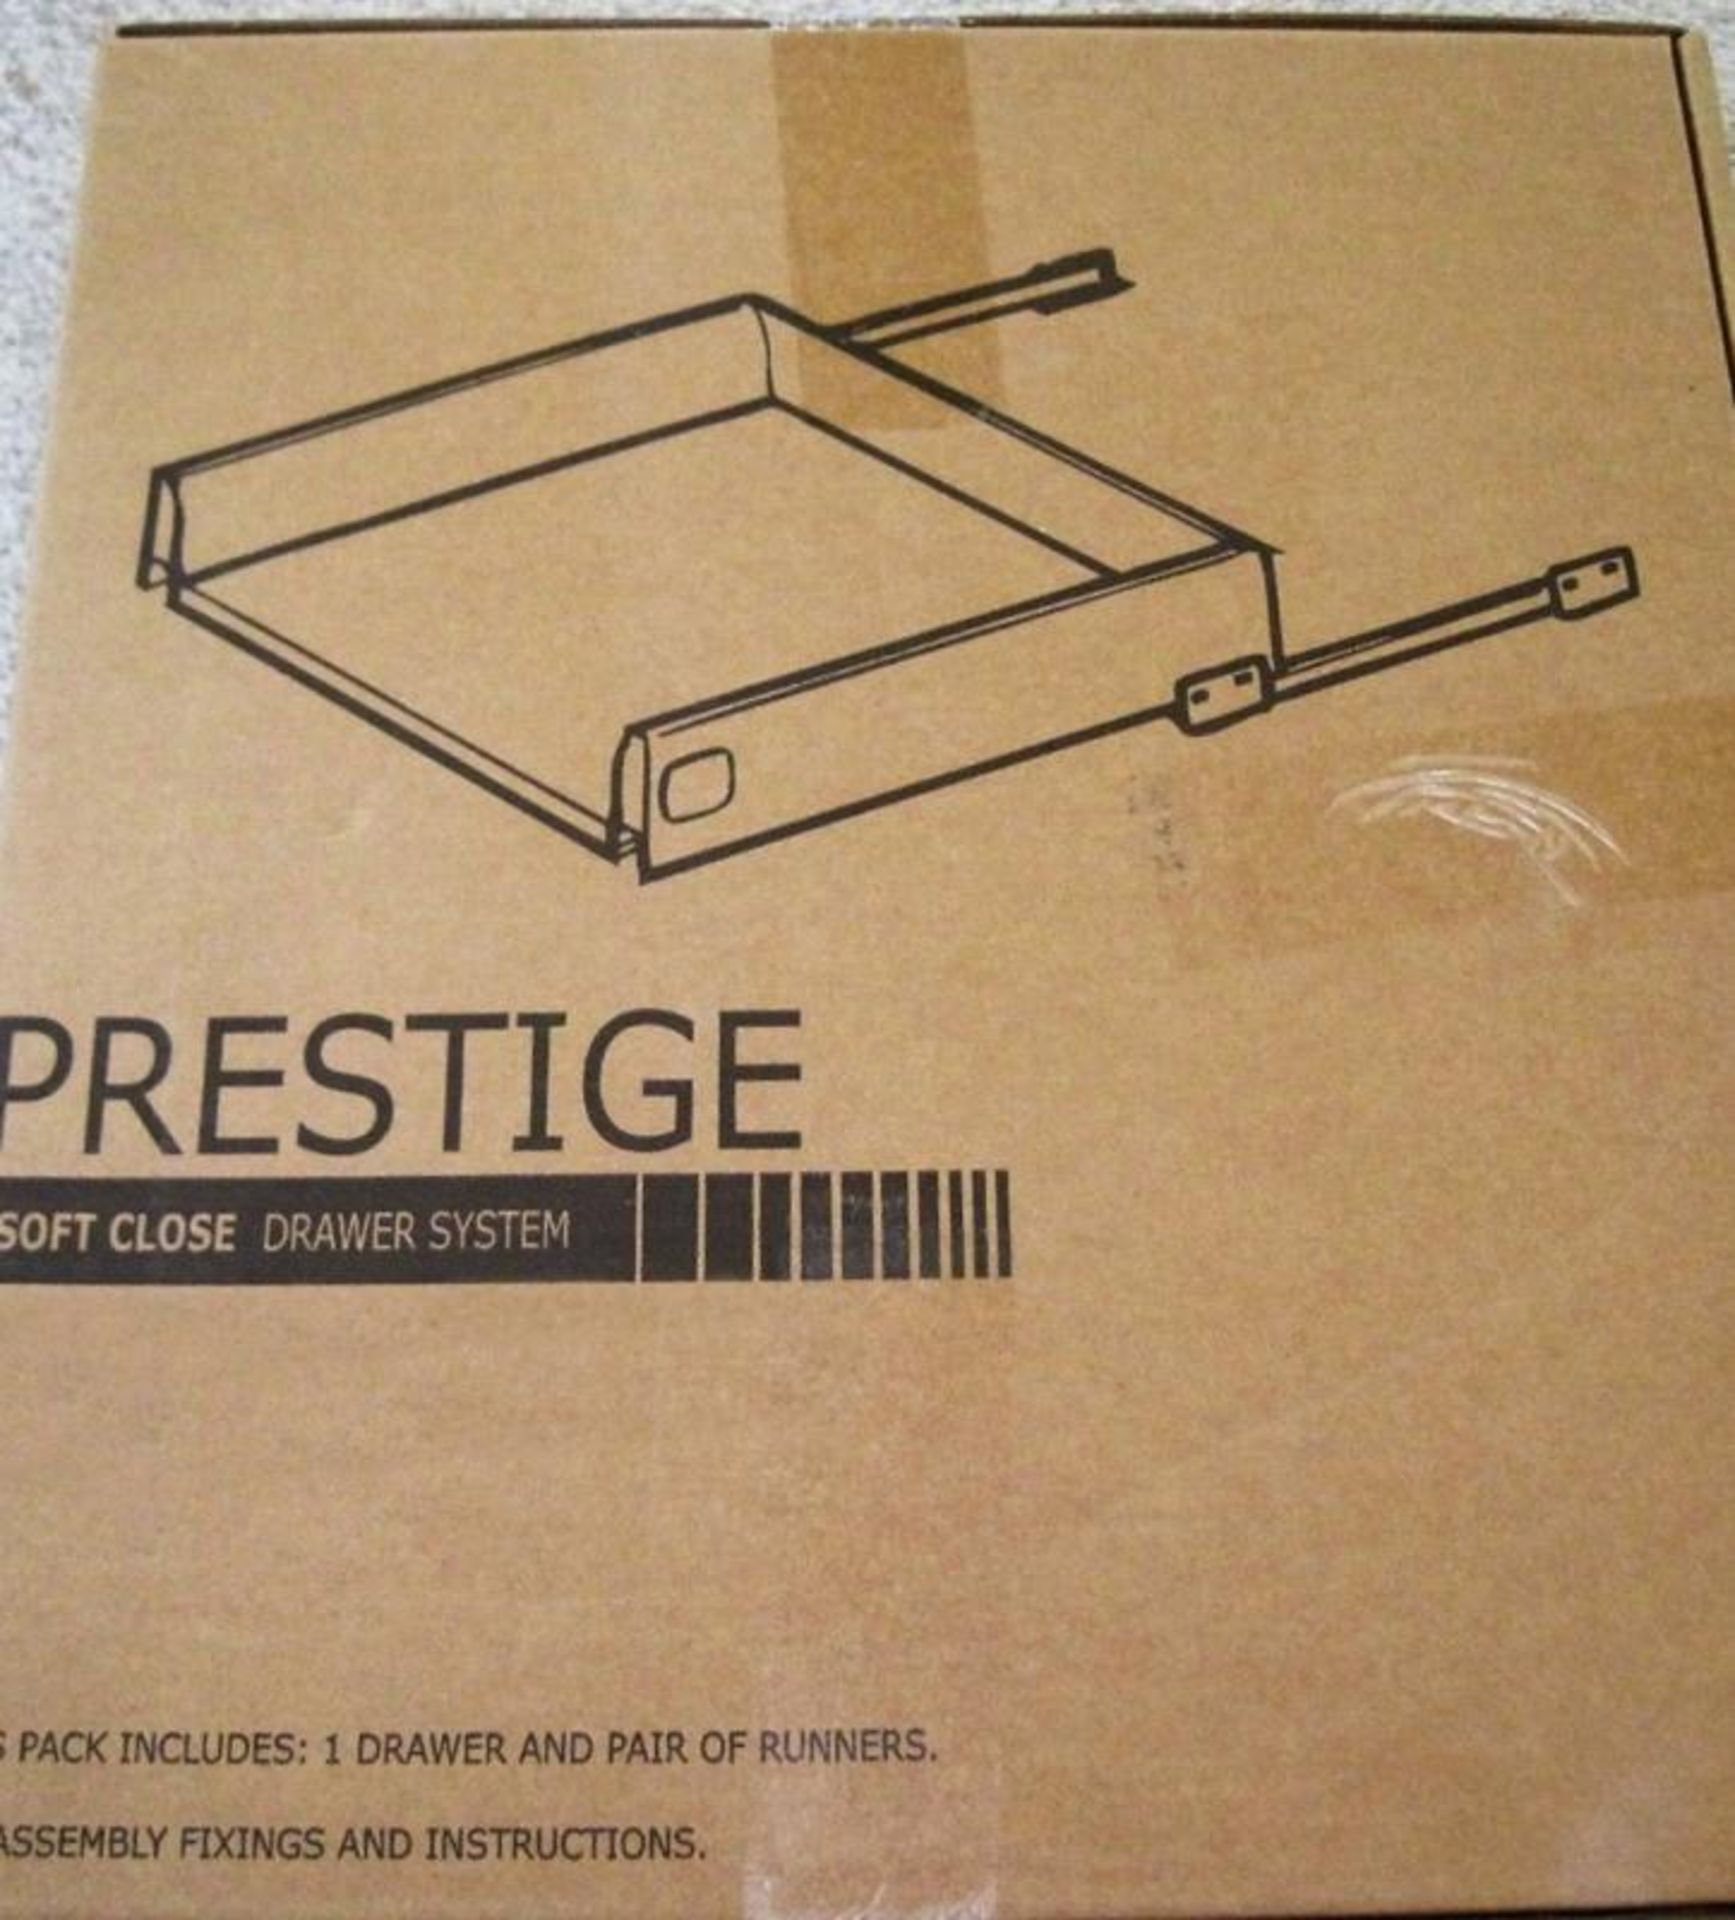 4 x 500mm Soft Close Kitchen Drawer Packs - B&Q Prestige - Brand New Stock - Features Include - Image 3 of 4